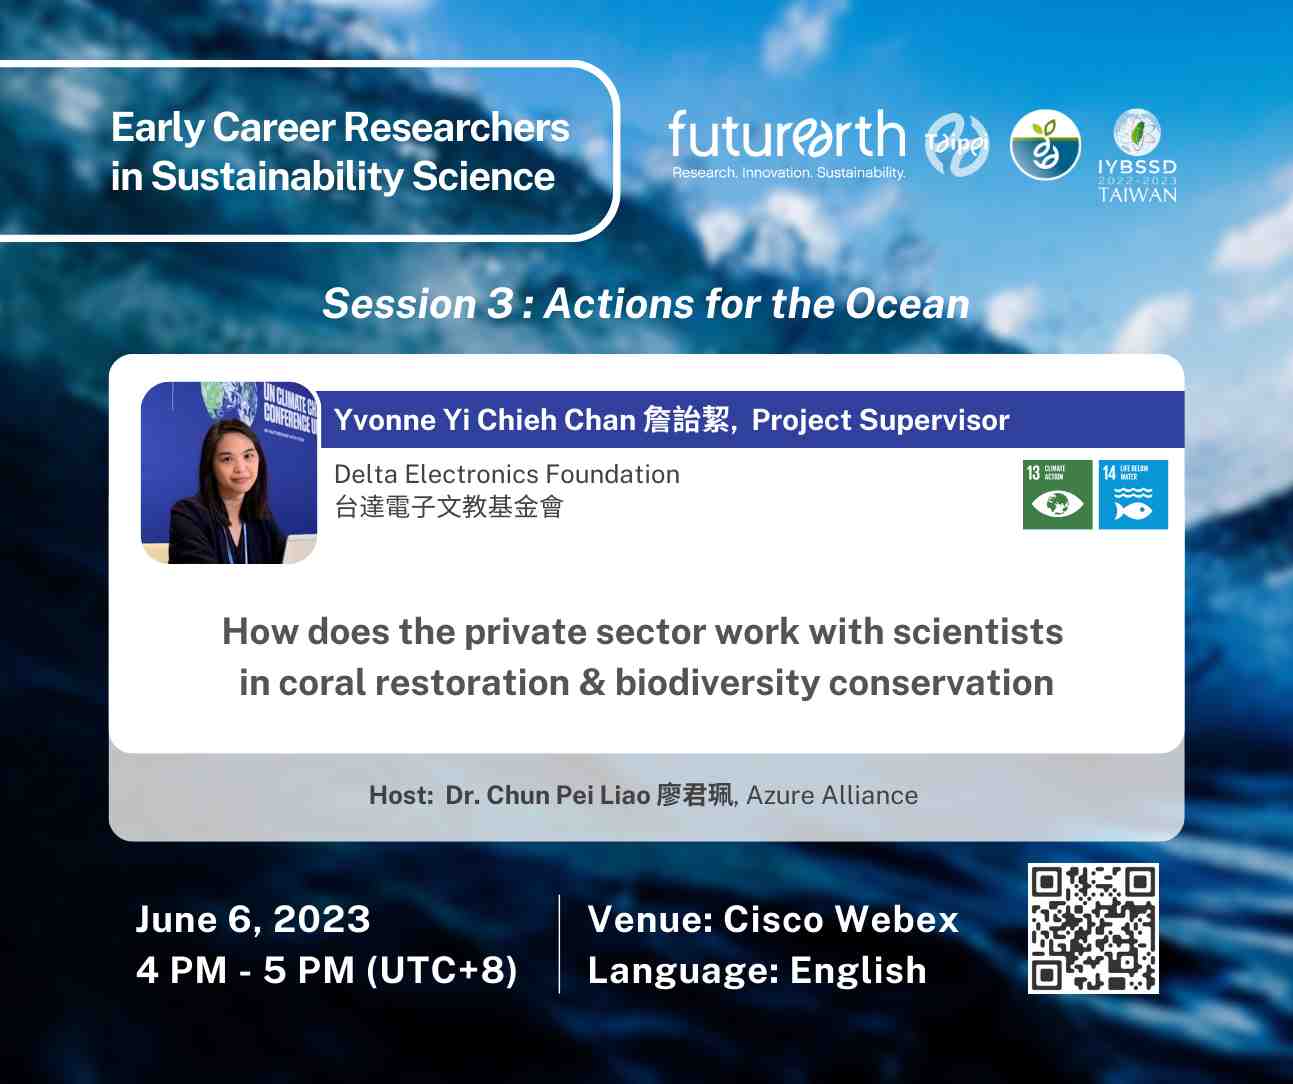 ???????????????? ???????????????? ???????? ???????????????????????????????????????????????????????? ????????????????????????????┃Actions for the Ocean〗— ❐ S3-4 How does the private sector work with scientists in coral restoration & biodiversity conservatio